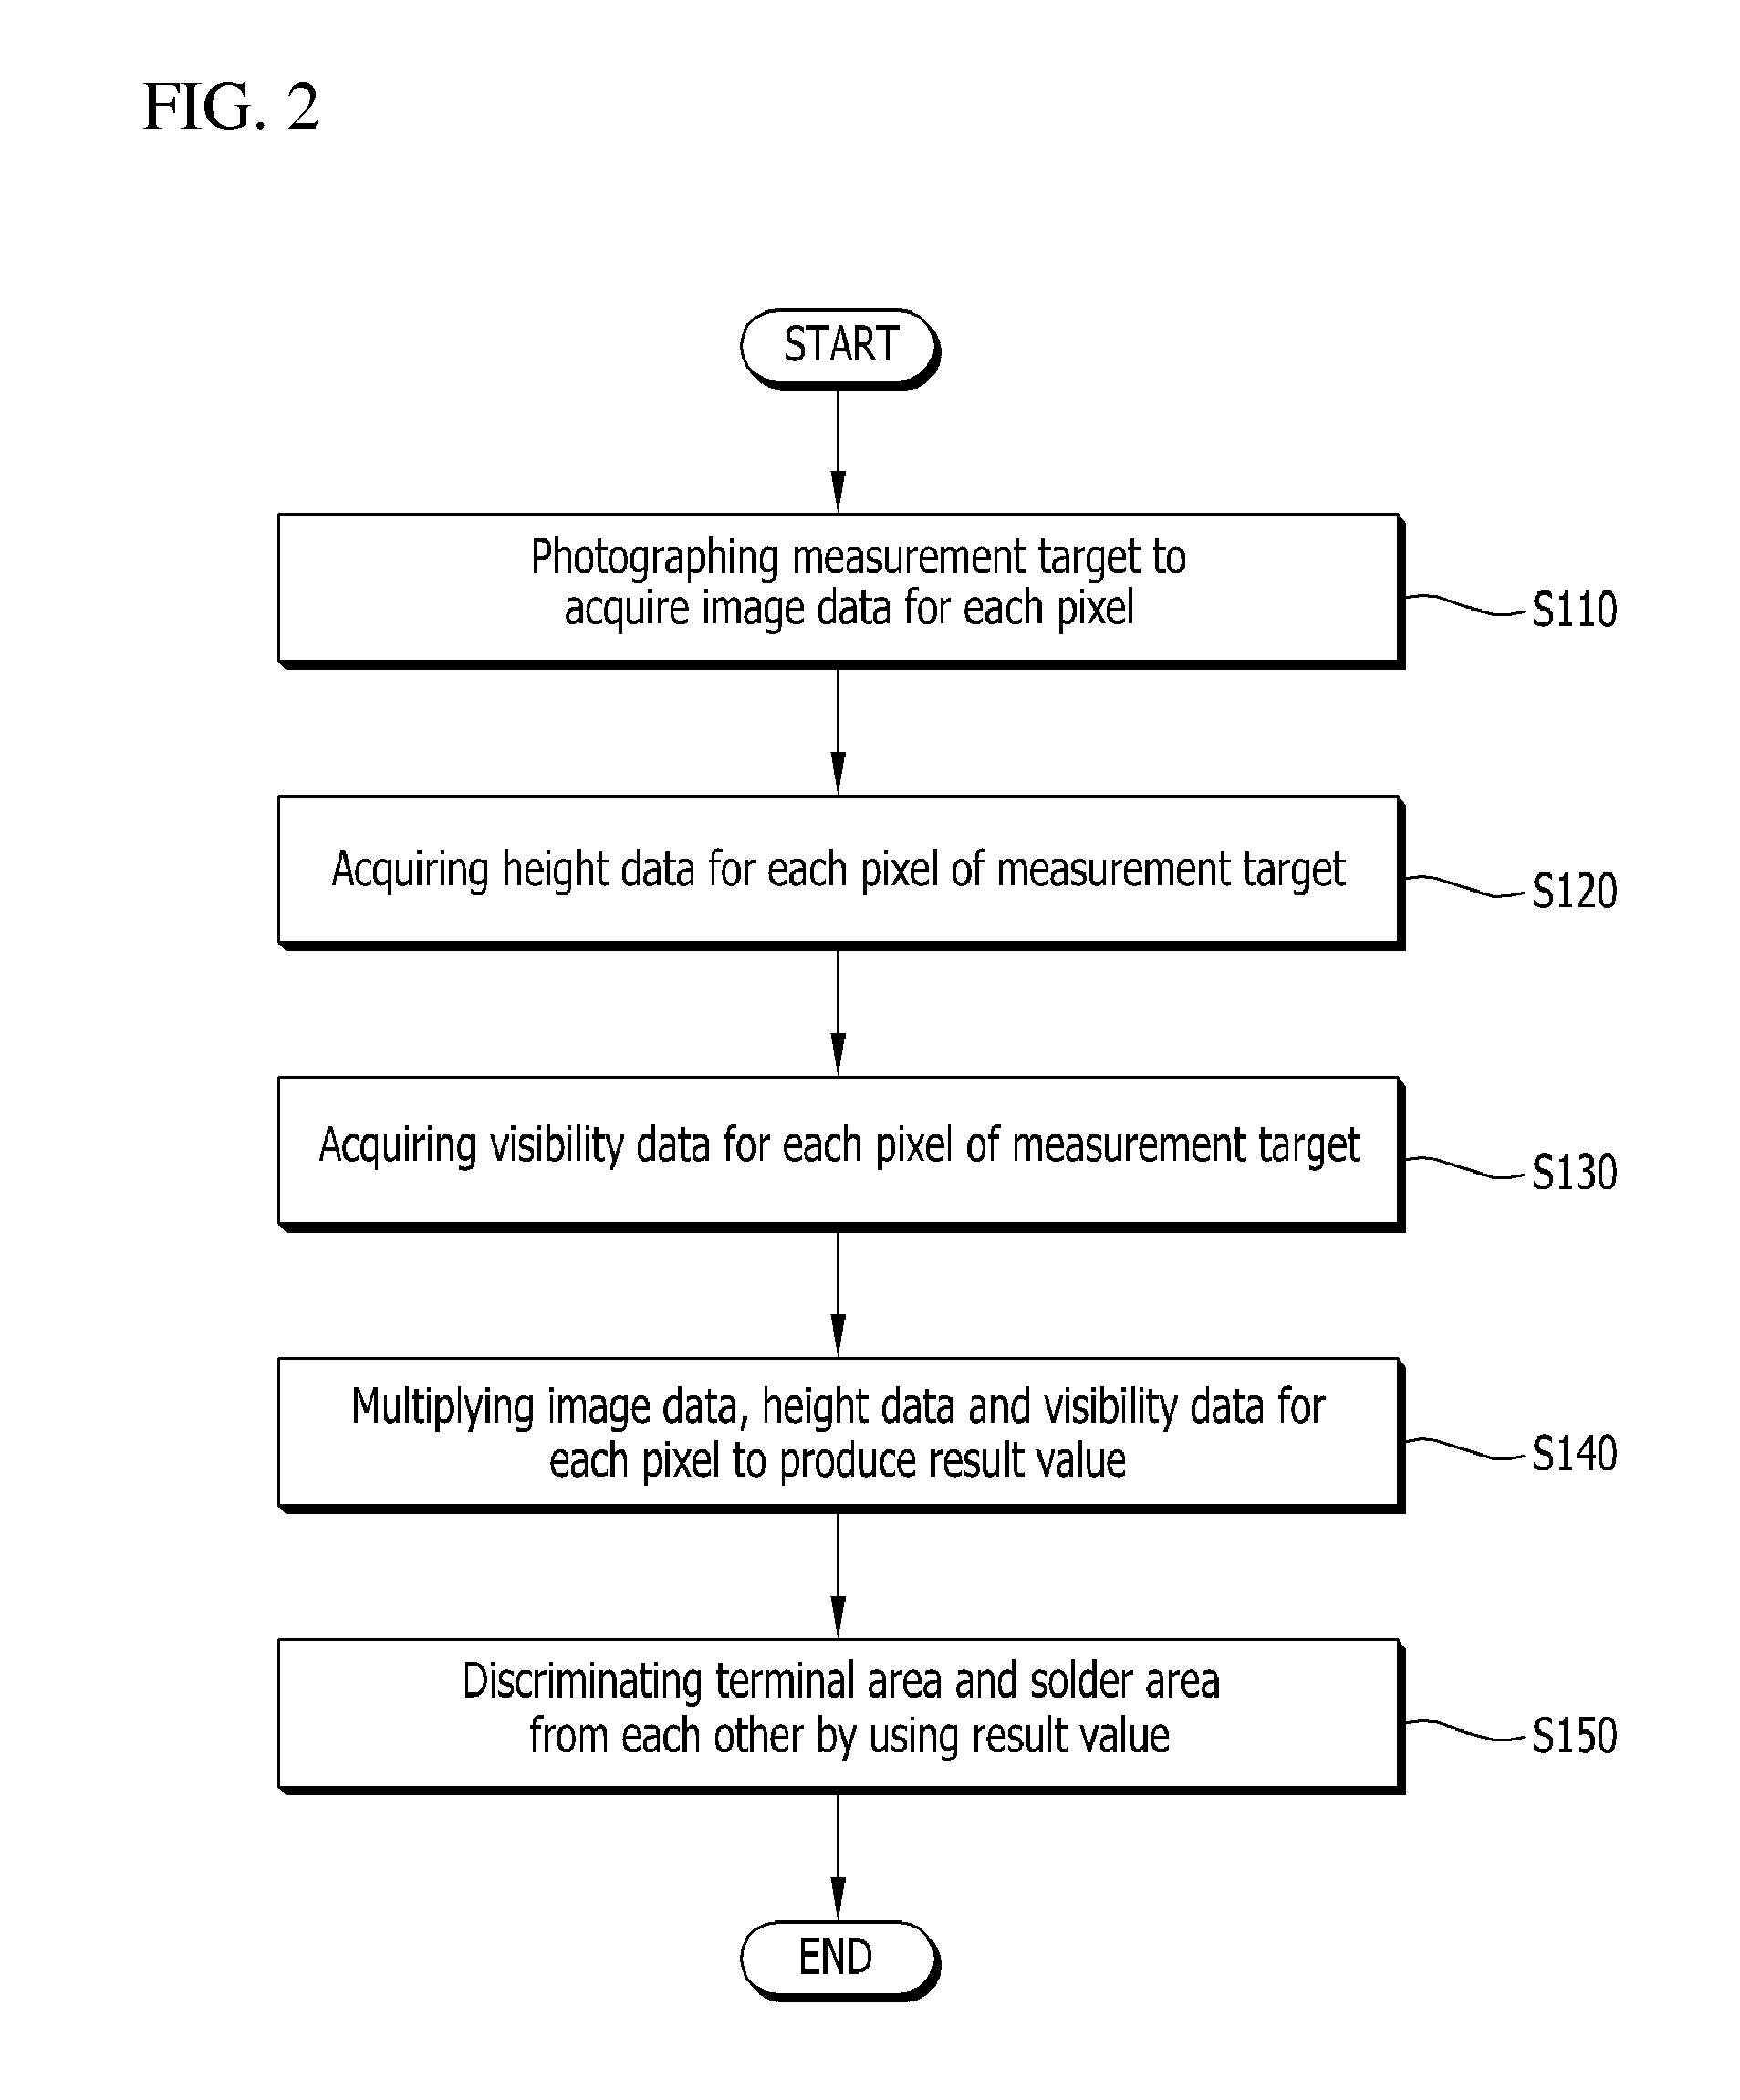 Board inspection apparatus and method